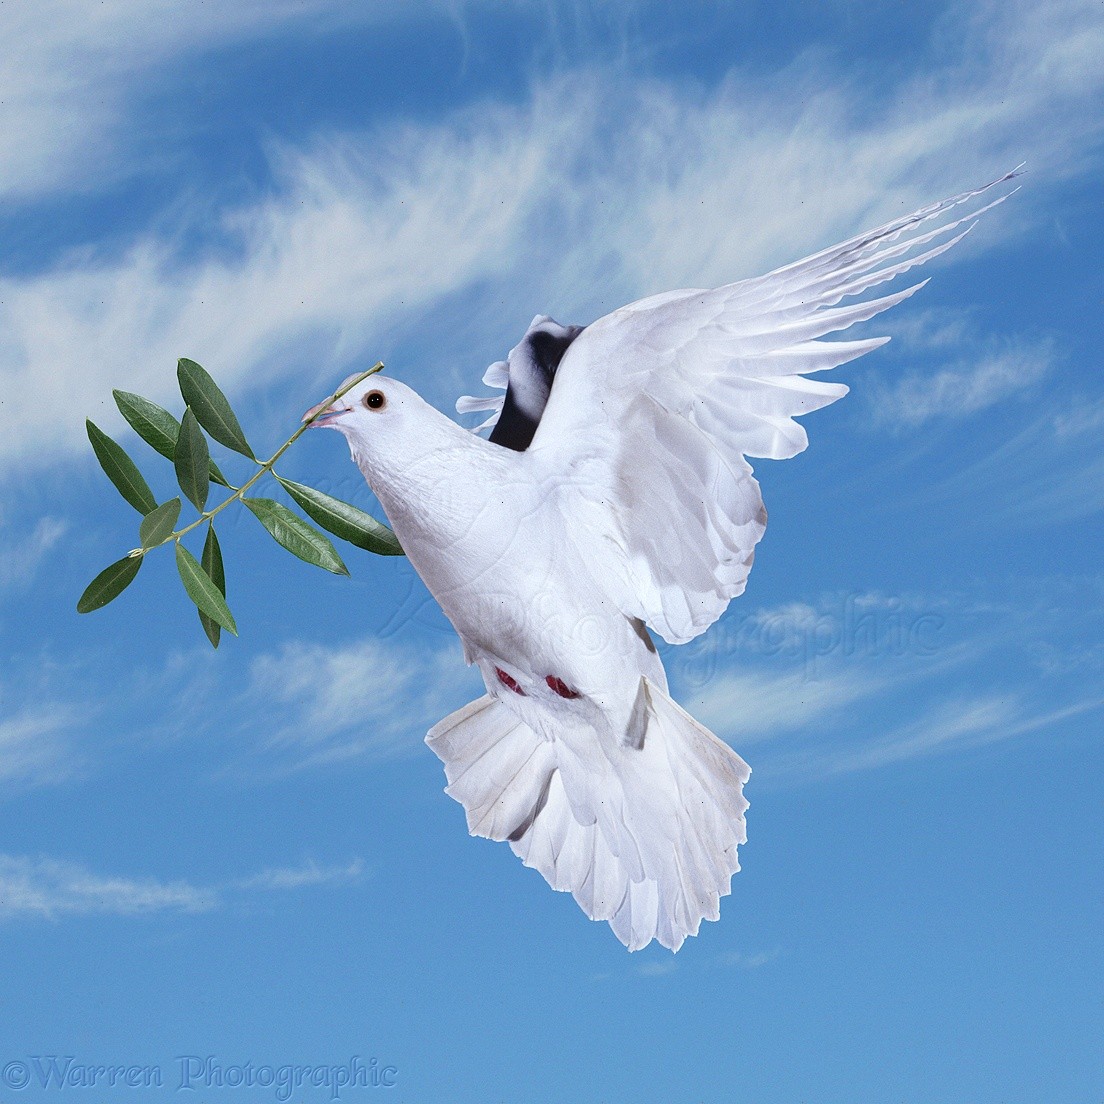 21517-Peace-dove-with-olive-branch.jpg